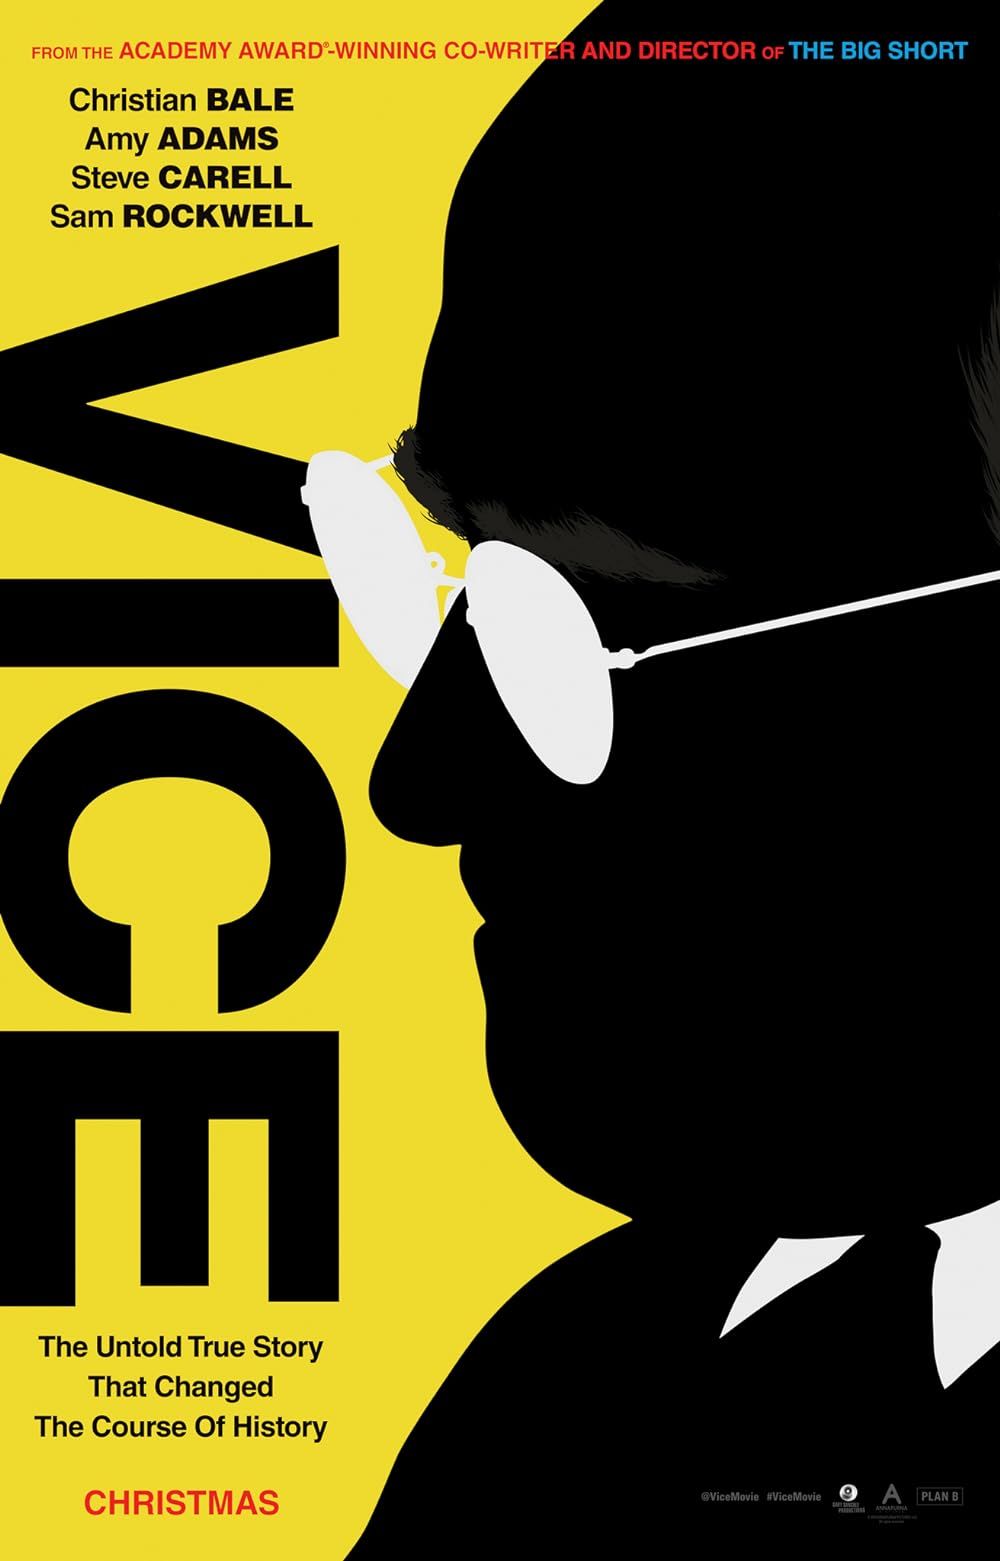 The Silhouette of Dick Cheney looks to the side on the poster for Vice